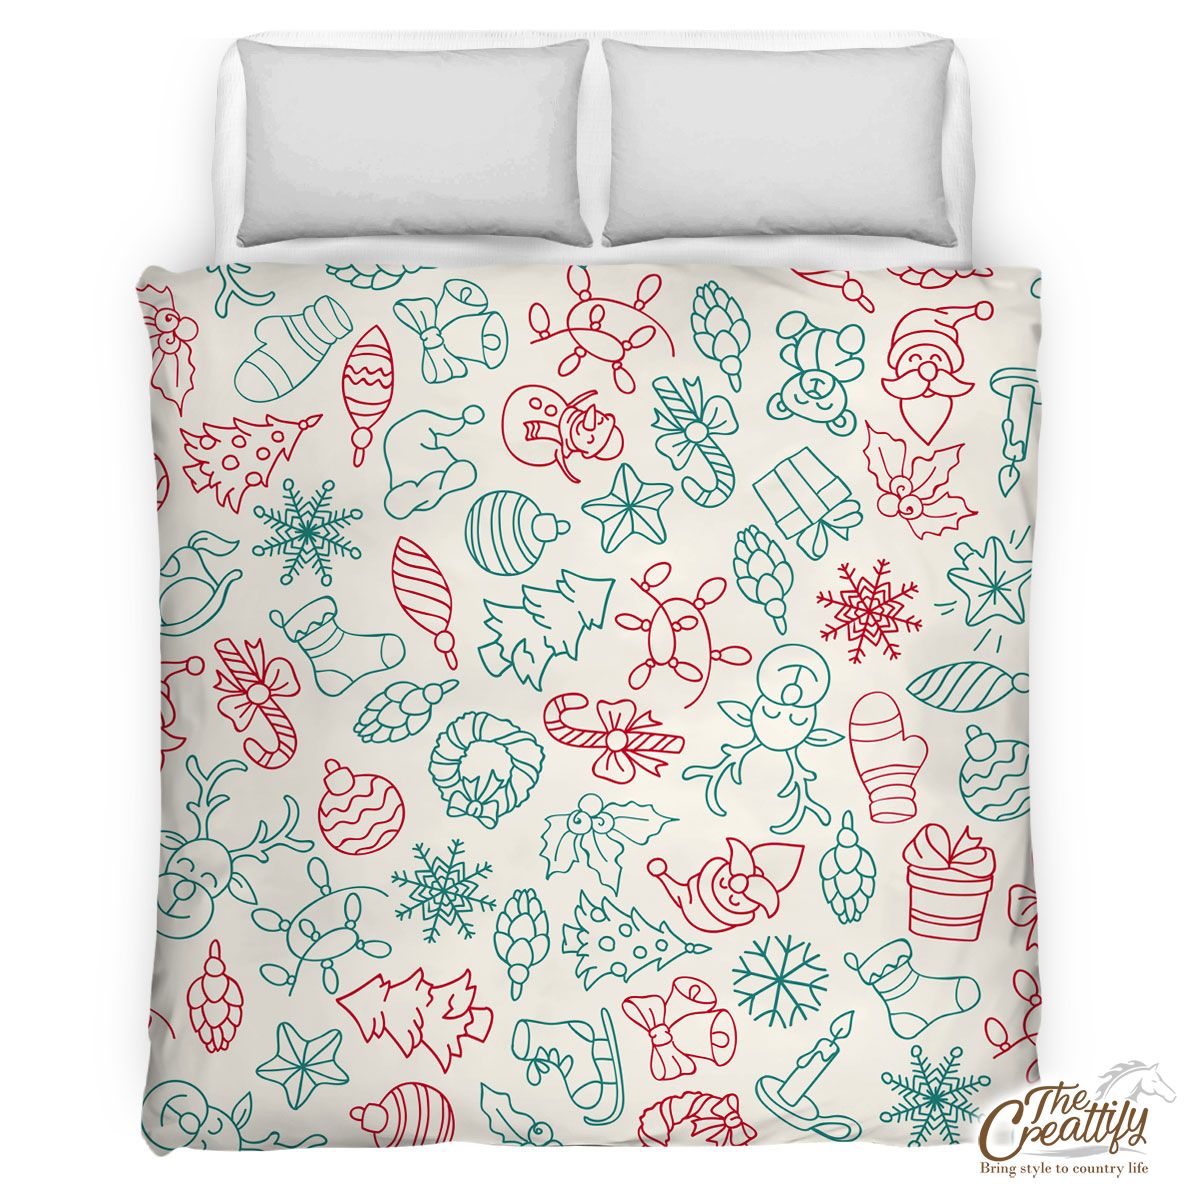 Snowflakes, Candy Cane, Baubles, Christmas Tree Pattern Comforter